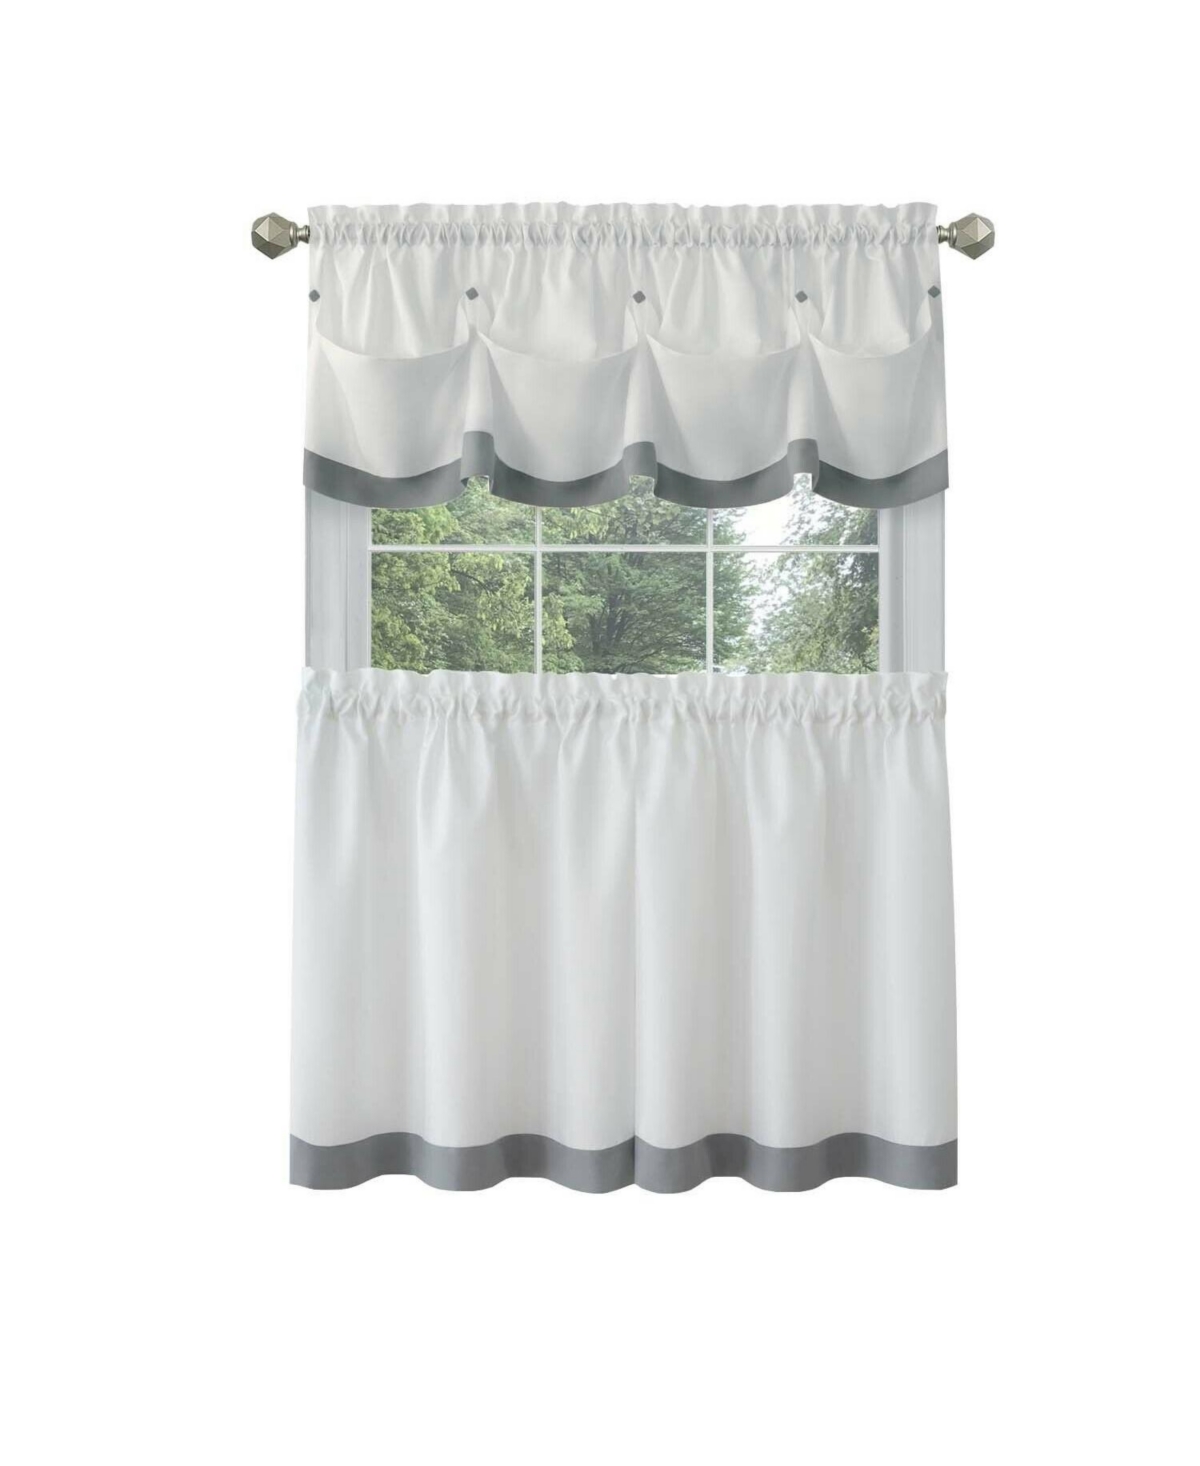 Mystic Seaport Watercolor Rod Pocket Complete 3 Piece Cafe Kitchen Curtain Tier & Valance Set - Spice - Gray